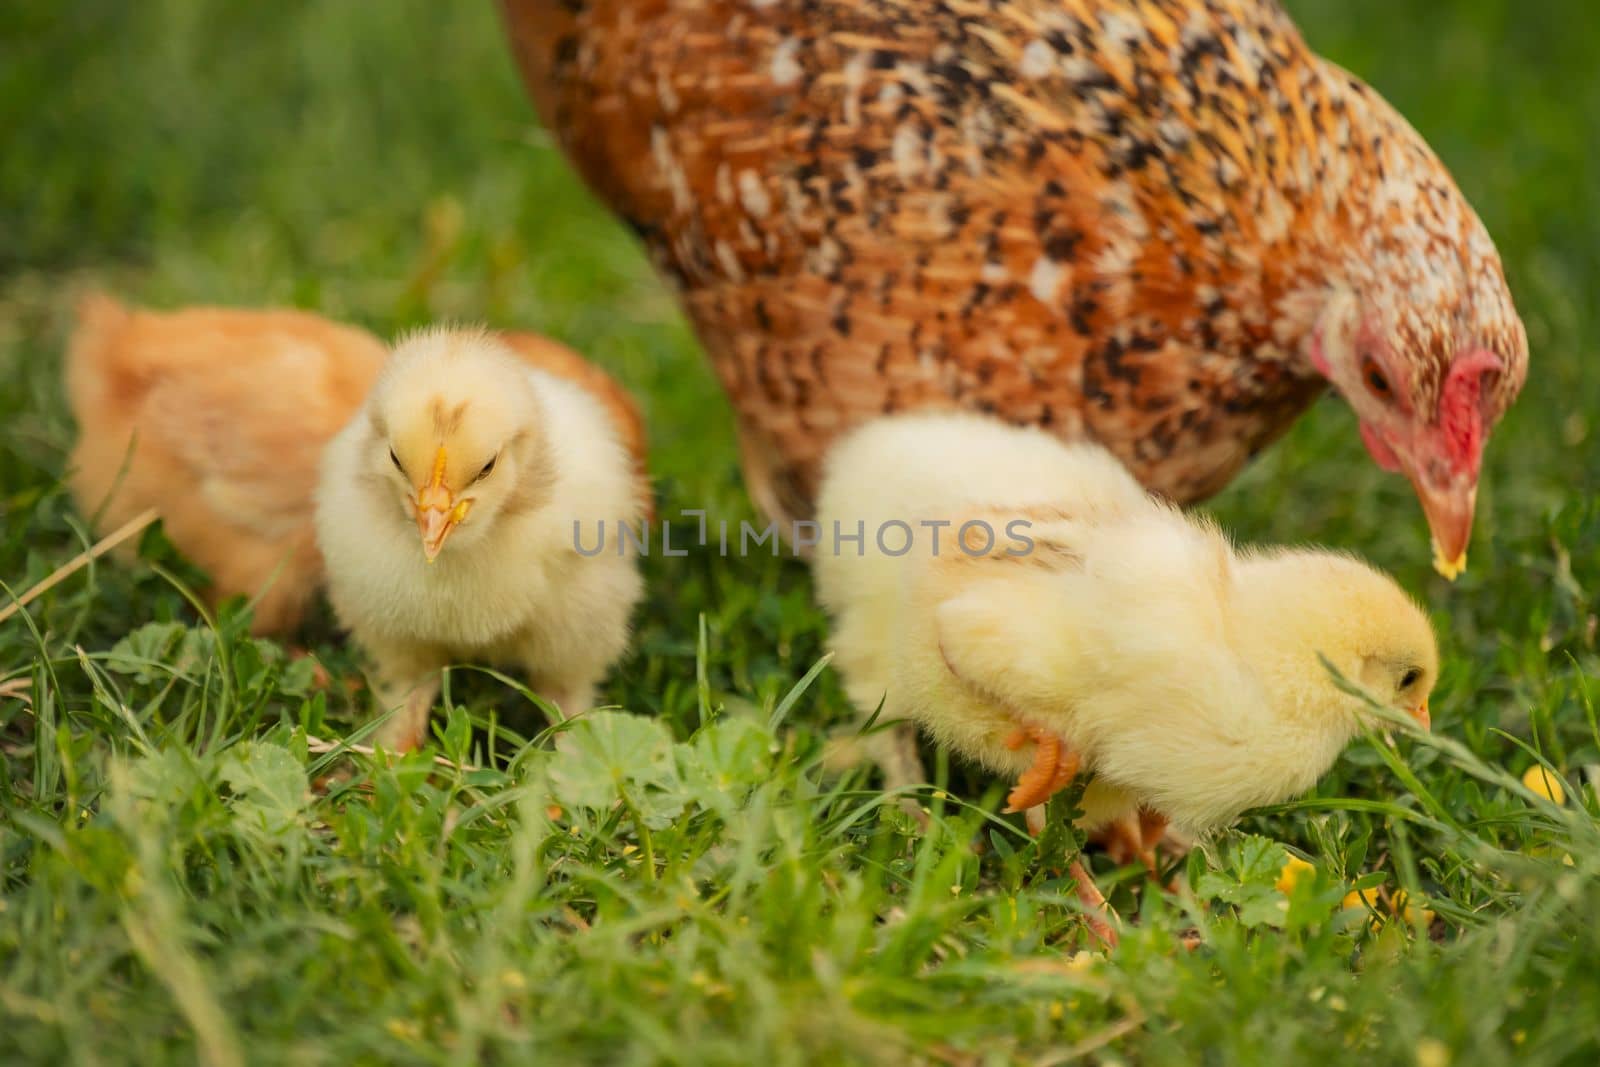 chickens with their mother walk on the grass, close-up